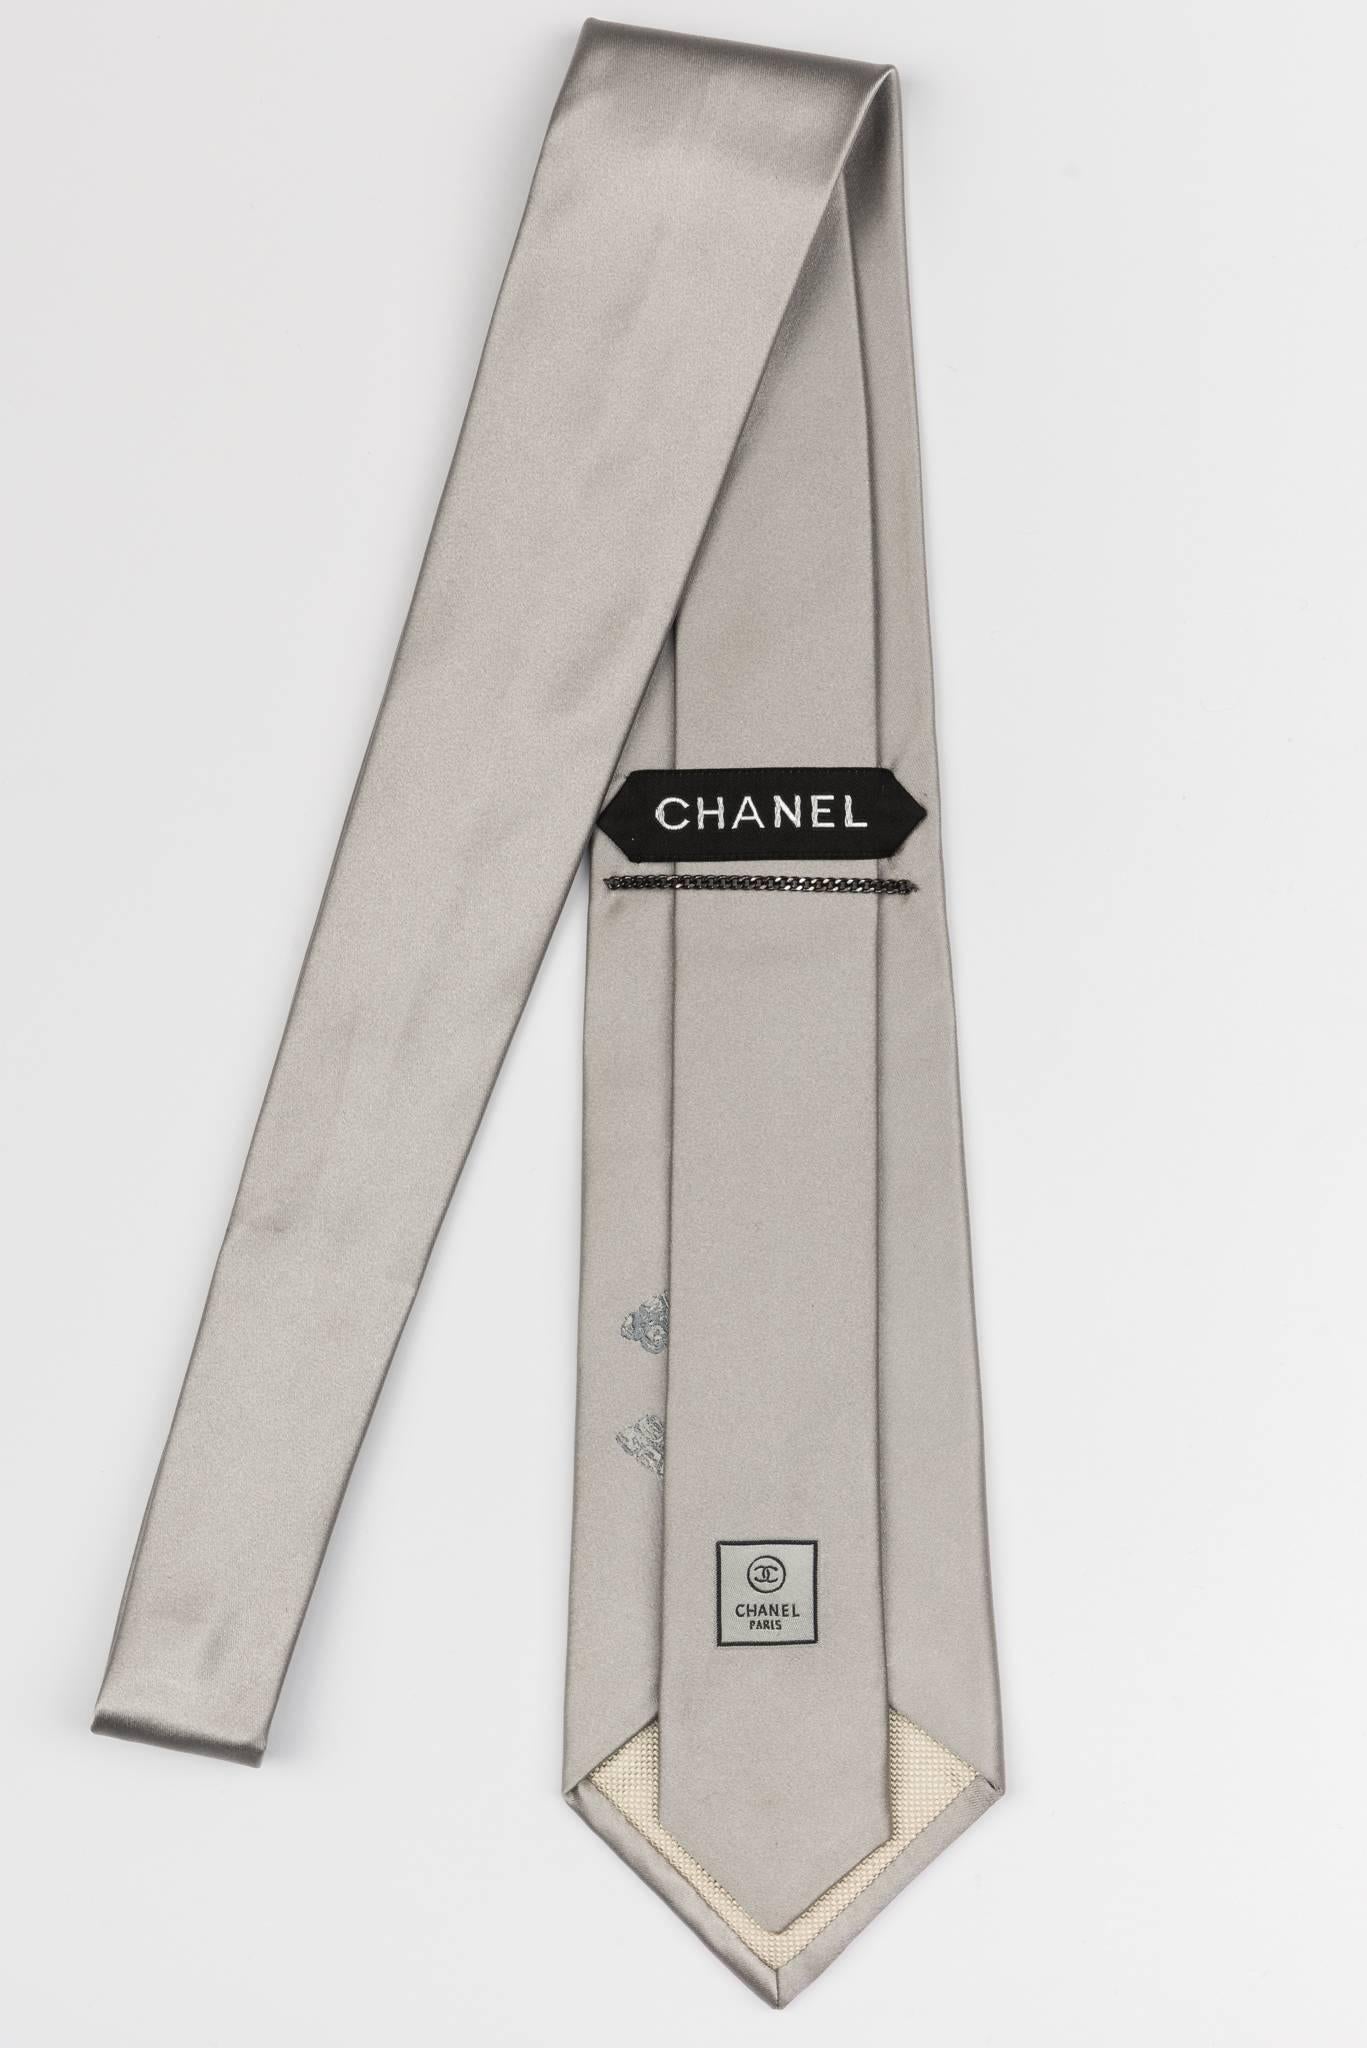 Chanel new in the original packaging and in excellent condition; Silver solid silk tie with oversize CC logo detail.